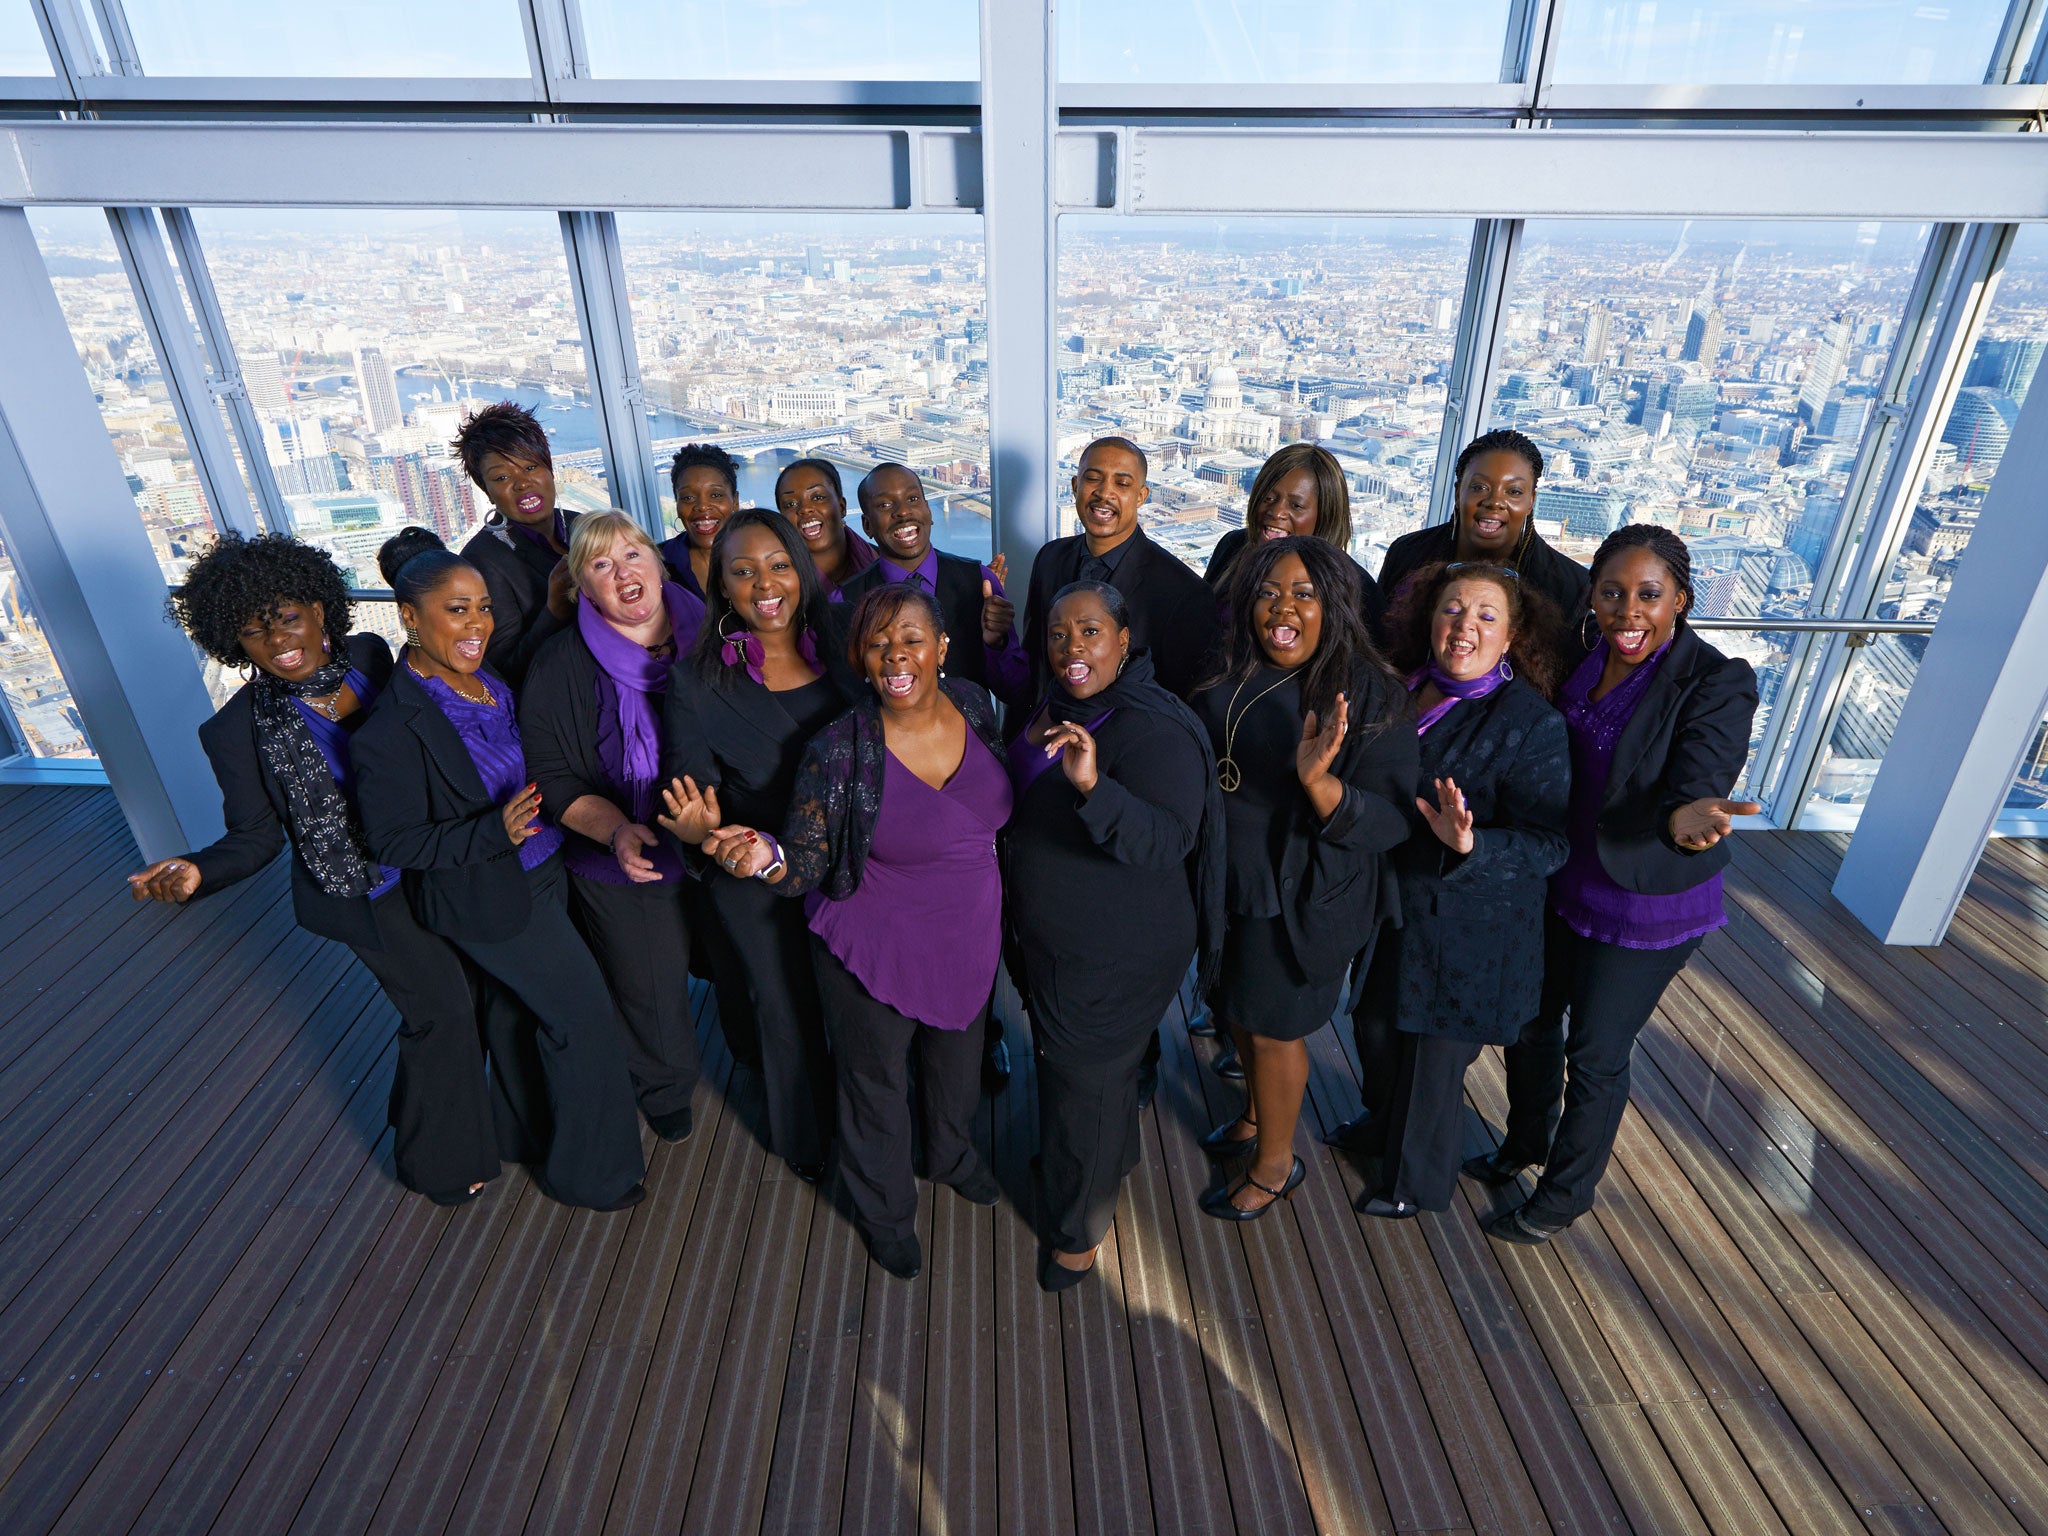 Heart and soul: The London Community Gospel Choir is to mark its 30th anniversary with an attempt on the world record for most singers in one concert – they aim to get 1,200